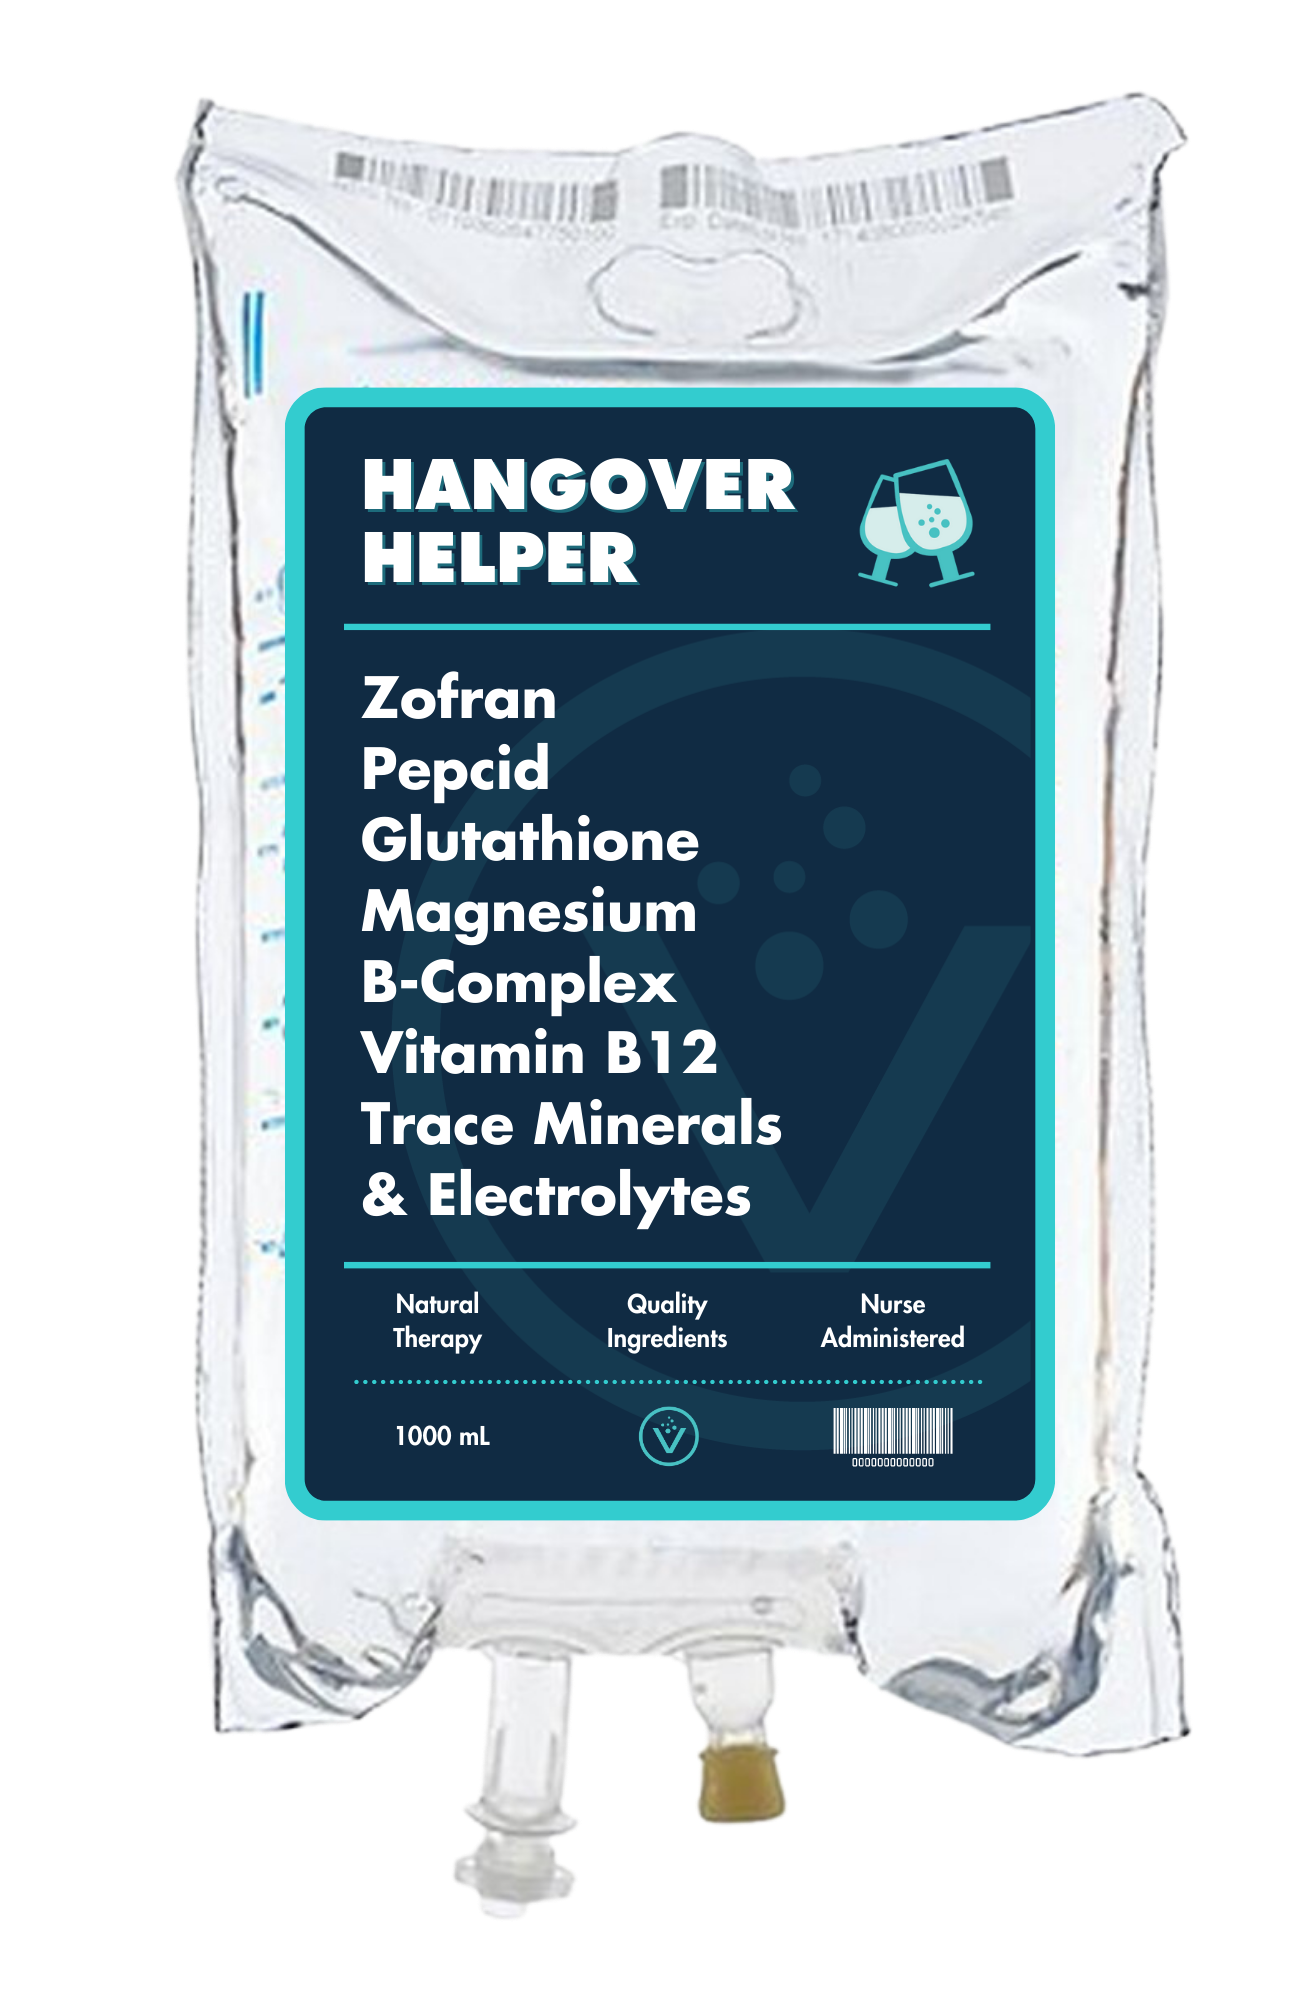 At-Home Hangover IV Treatment